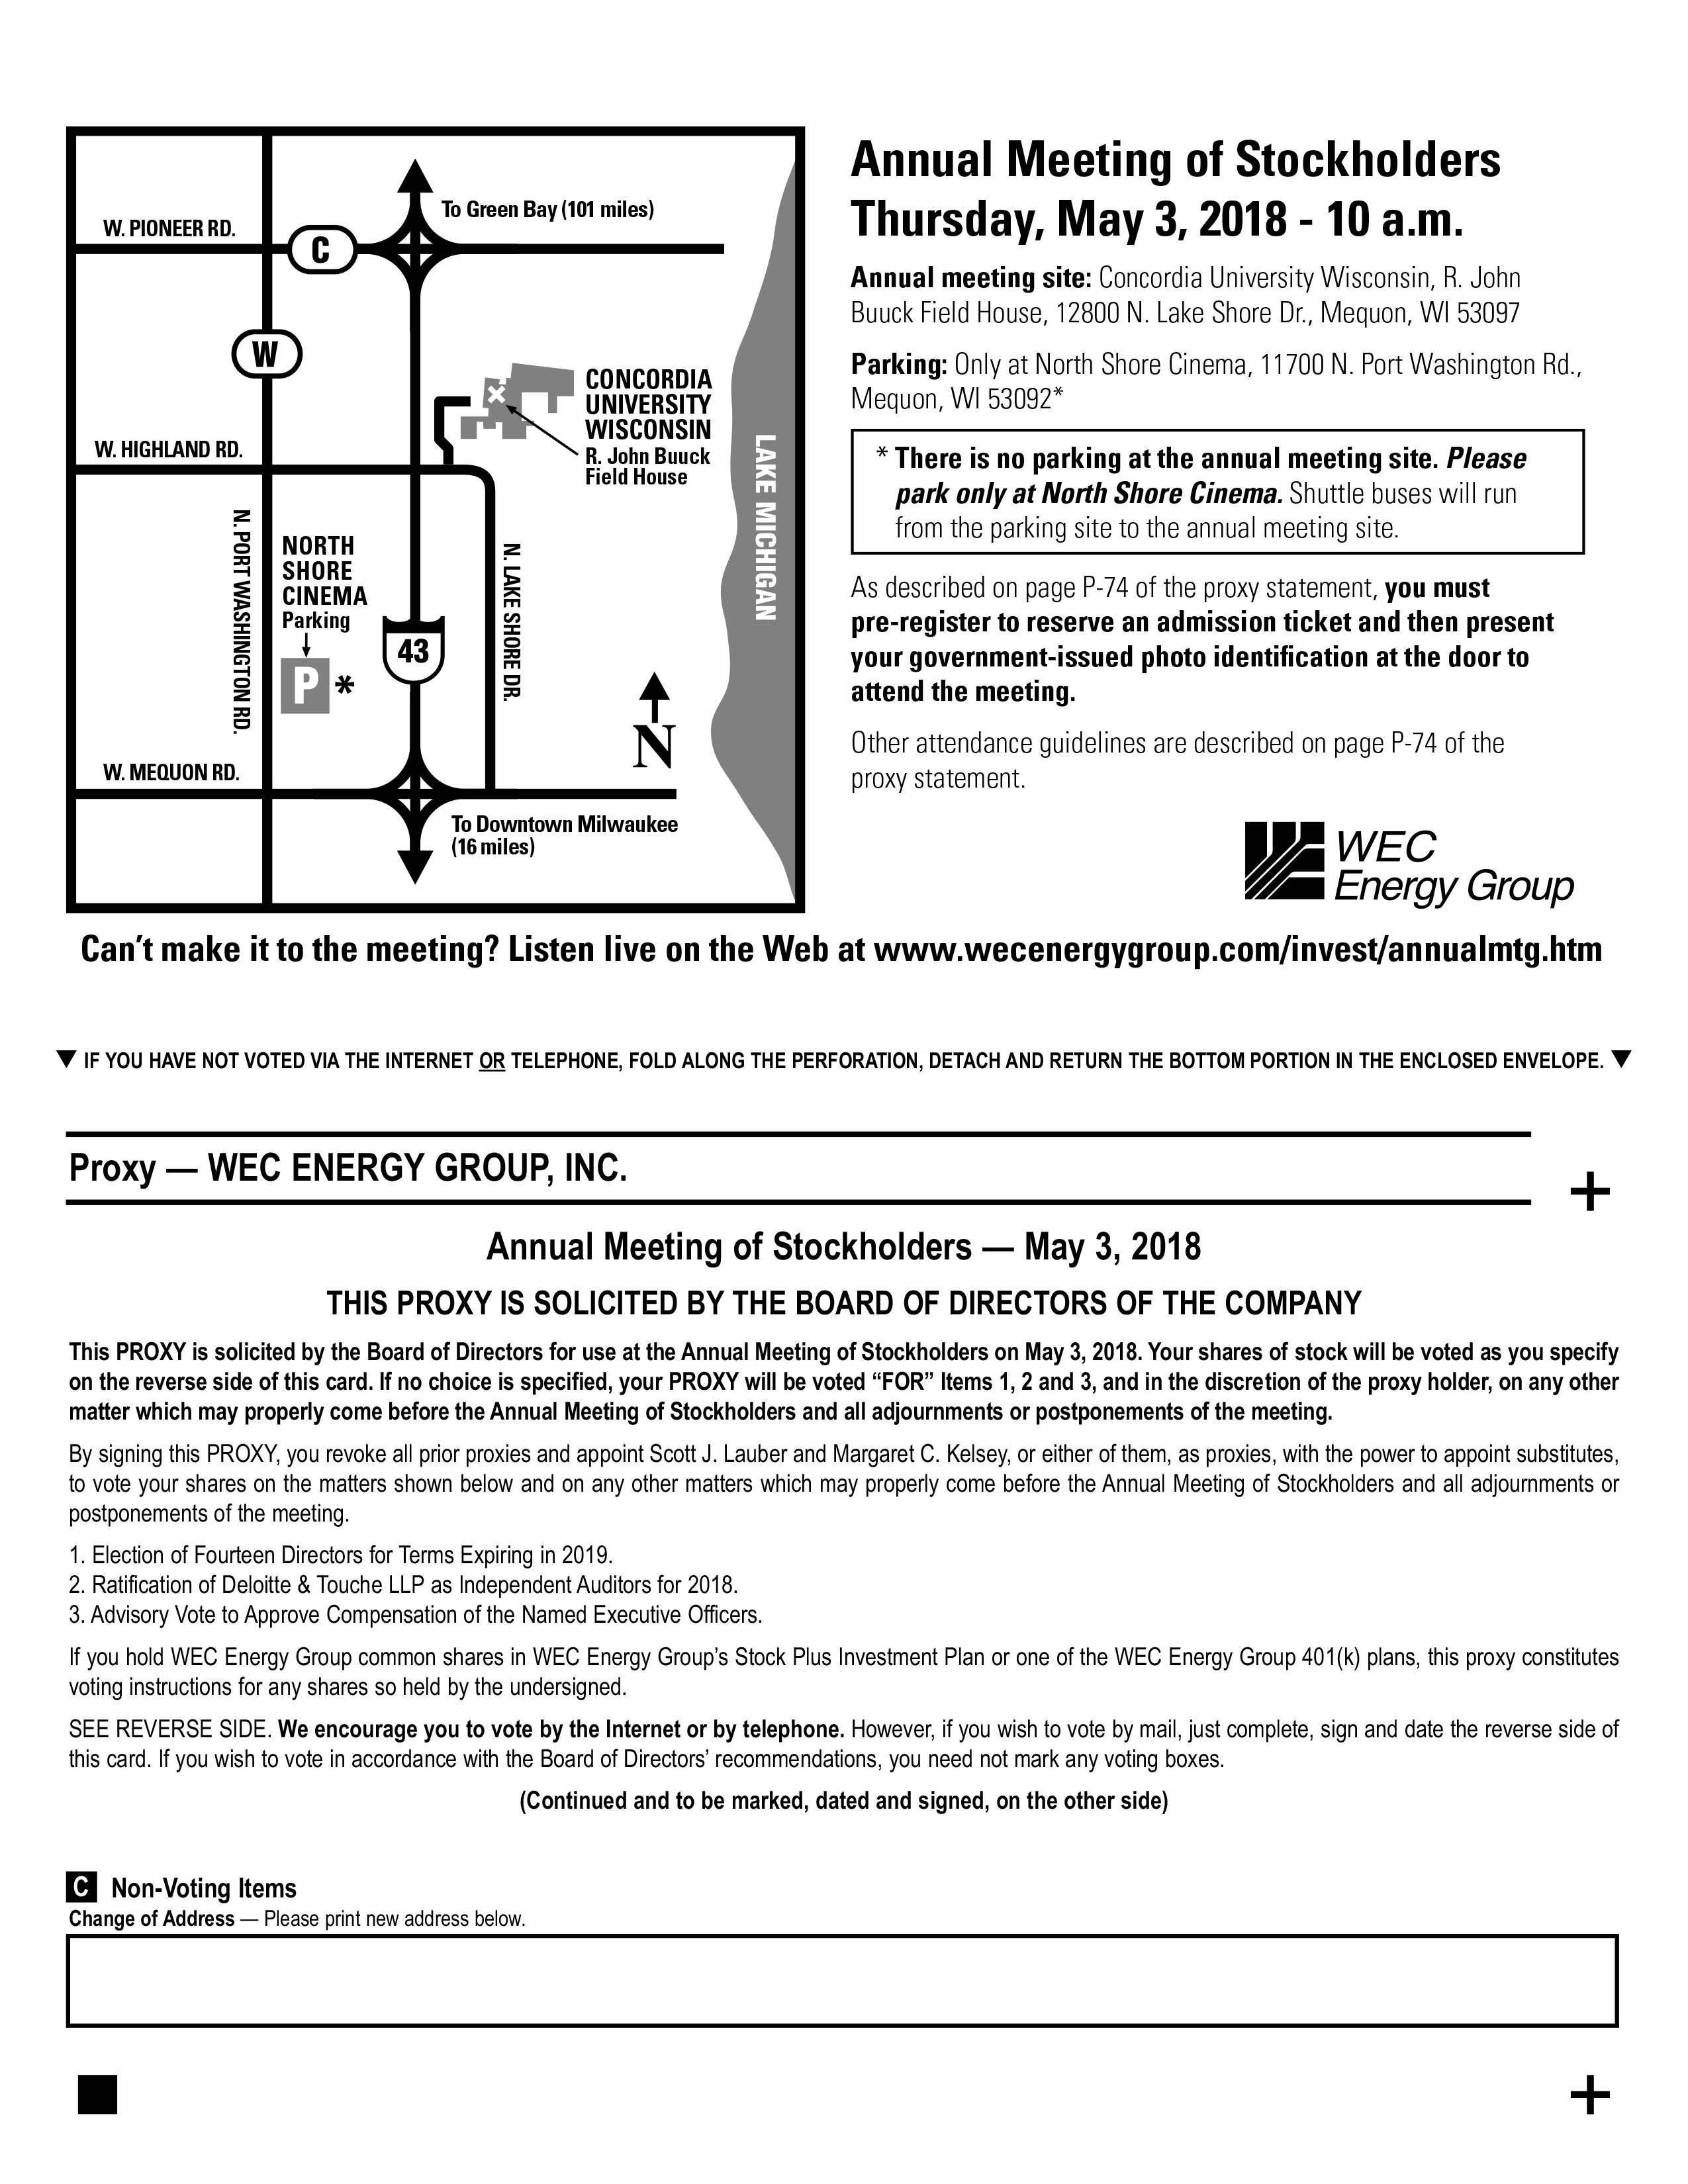 wecproxycard18page2a01.jpg